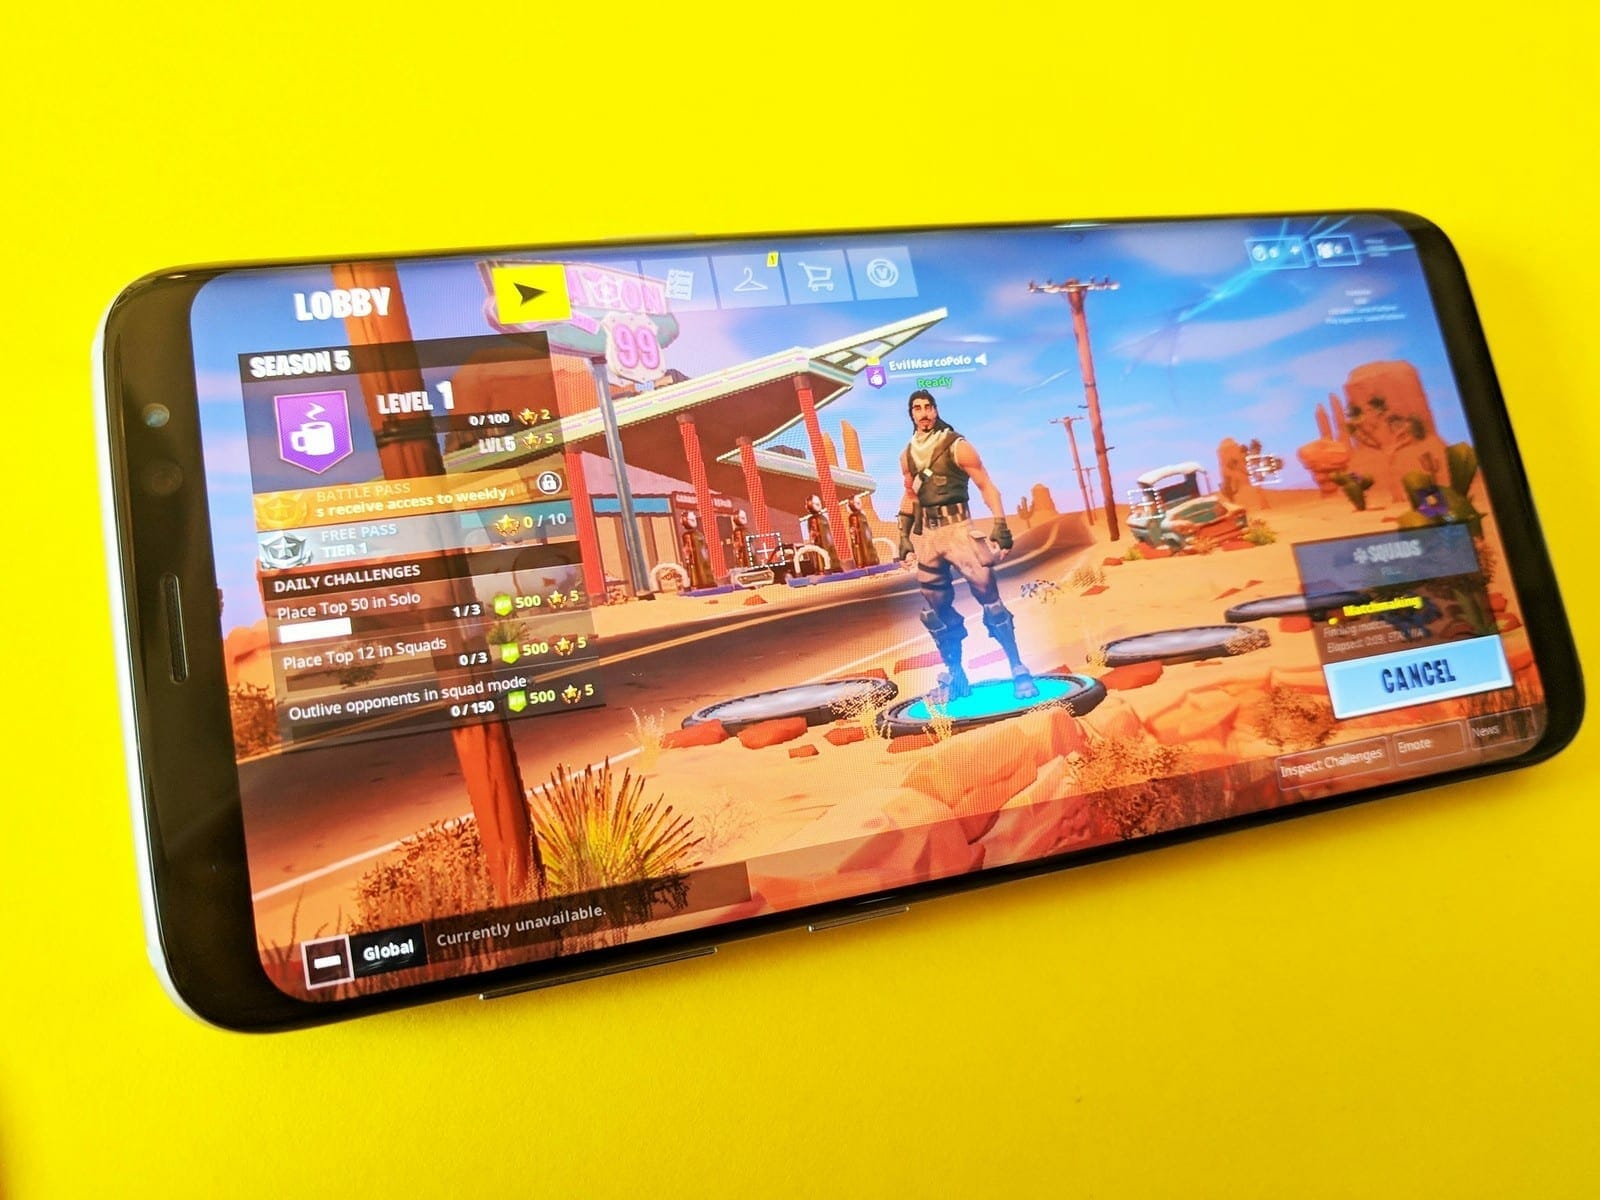  - how to run fortnite on android